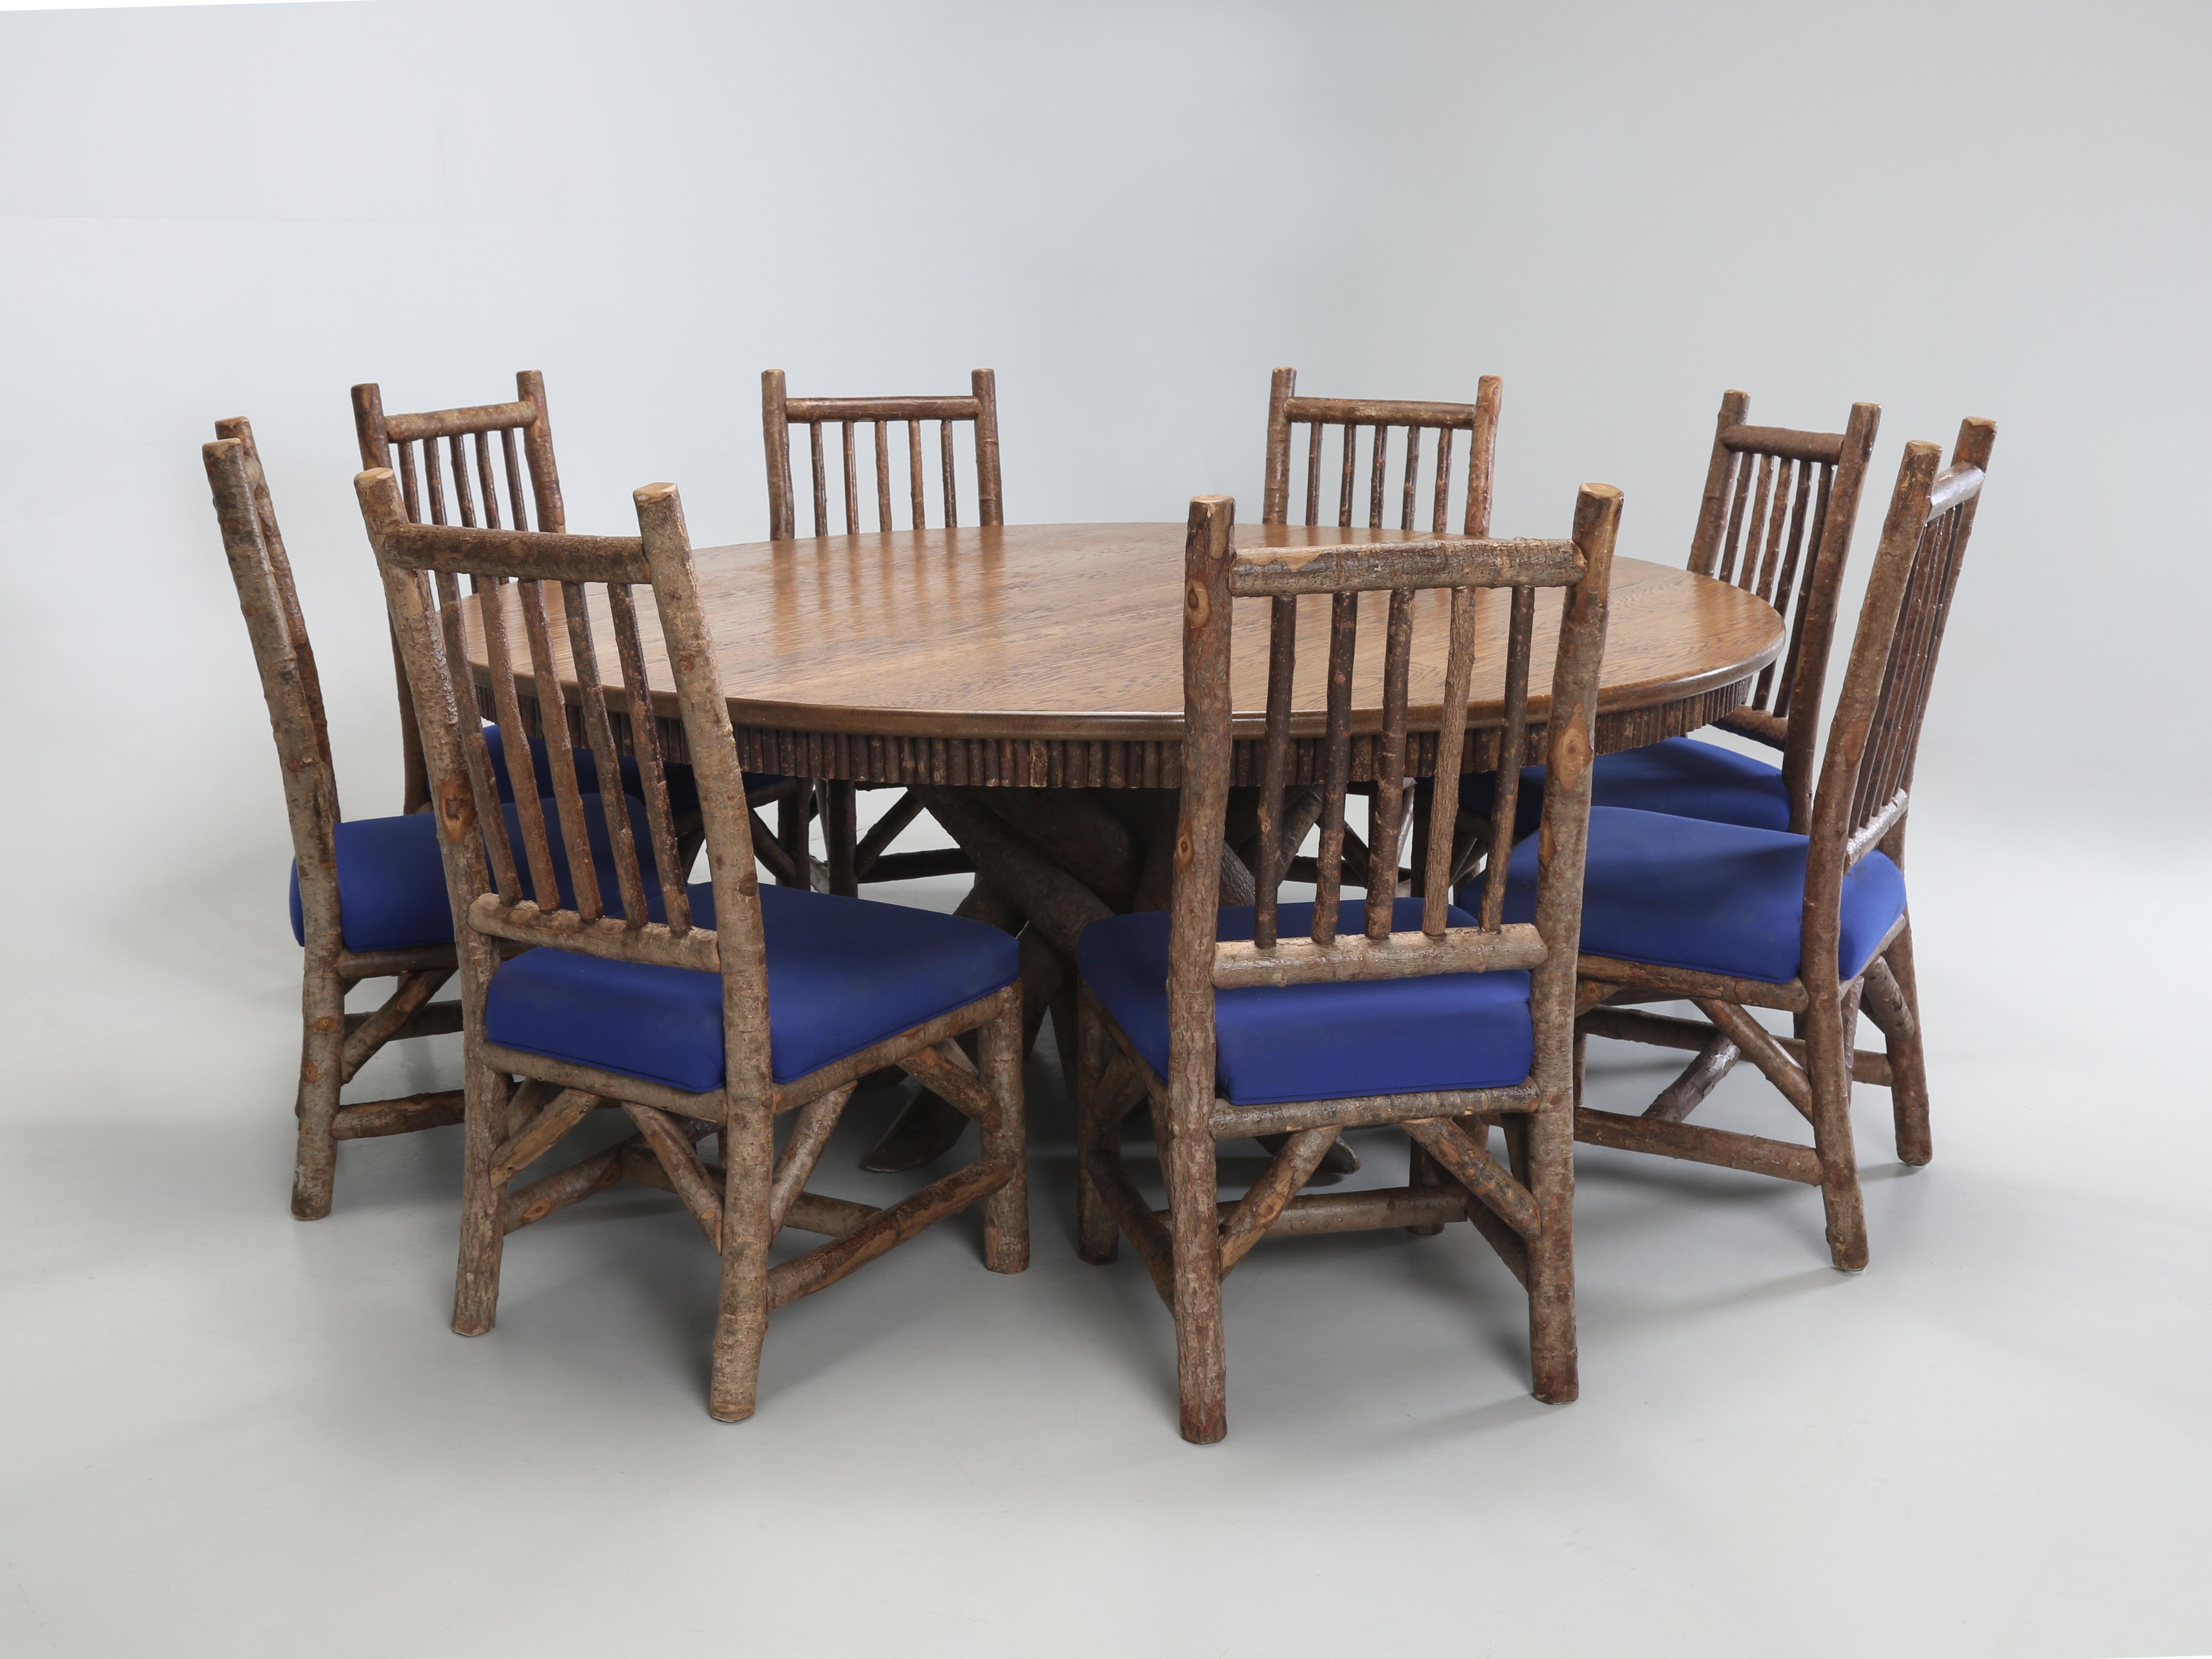 Round Solid Oak that was Hand-Scraped Dining Room Table Seat (8) Made in Wisconsin.
Admittedly, for a company who specializes in Country French Antiques, this is a bit unusual for us to offer. However, the quality that La Lune of Milwaukee Wisconsin